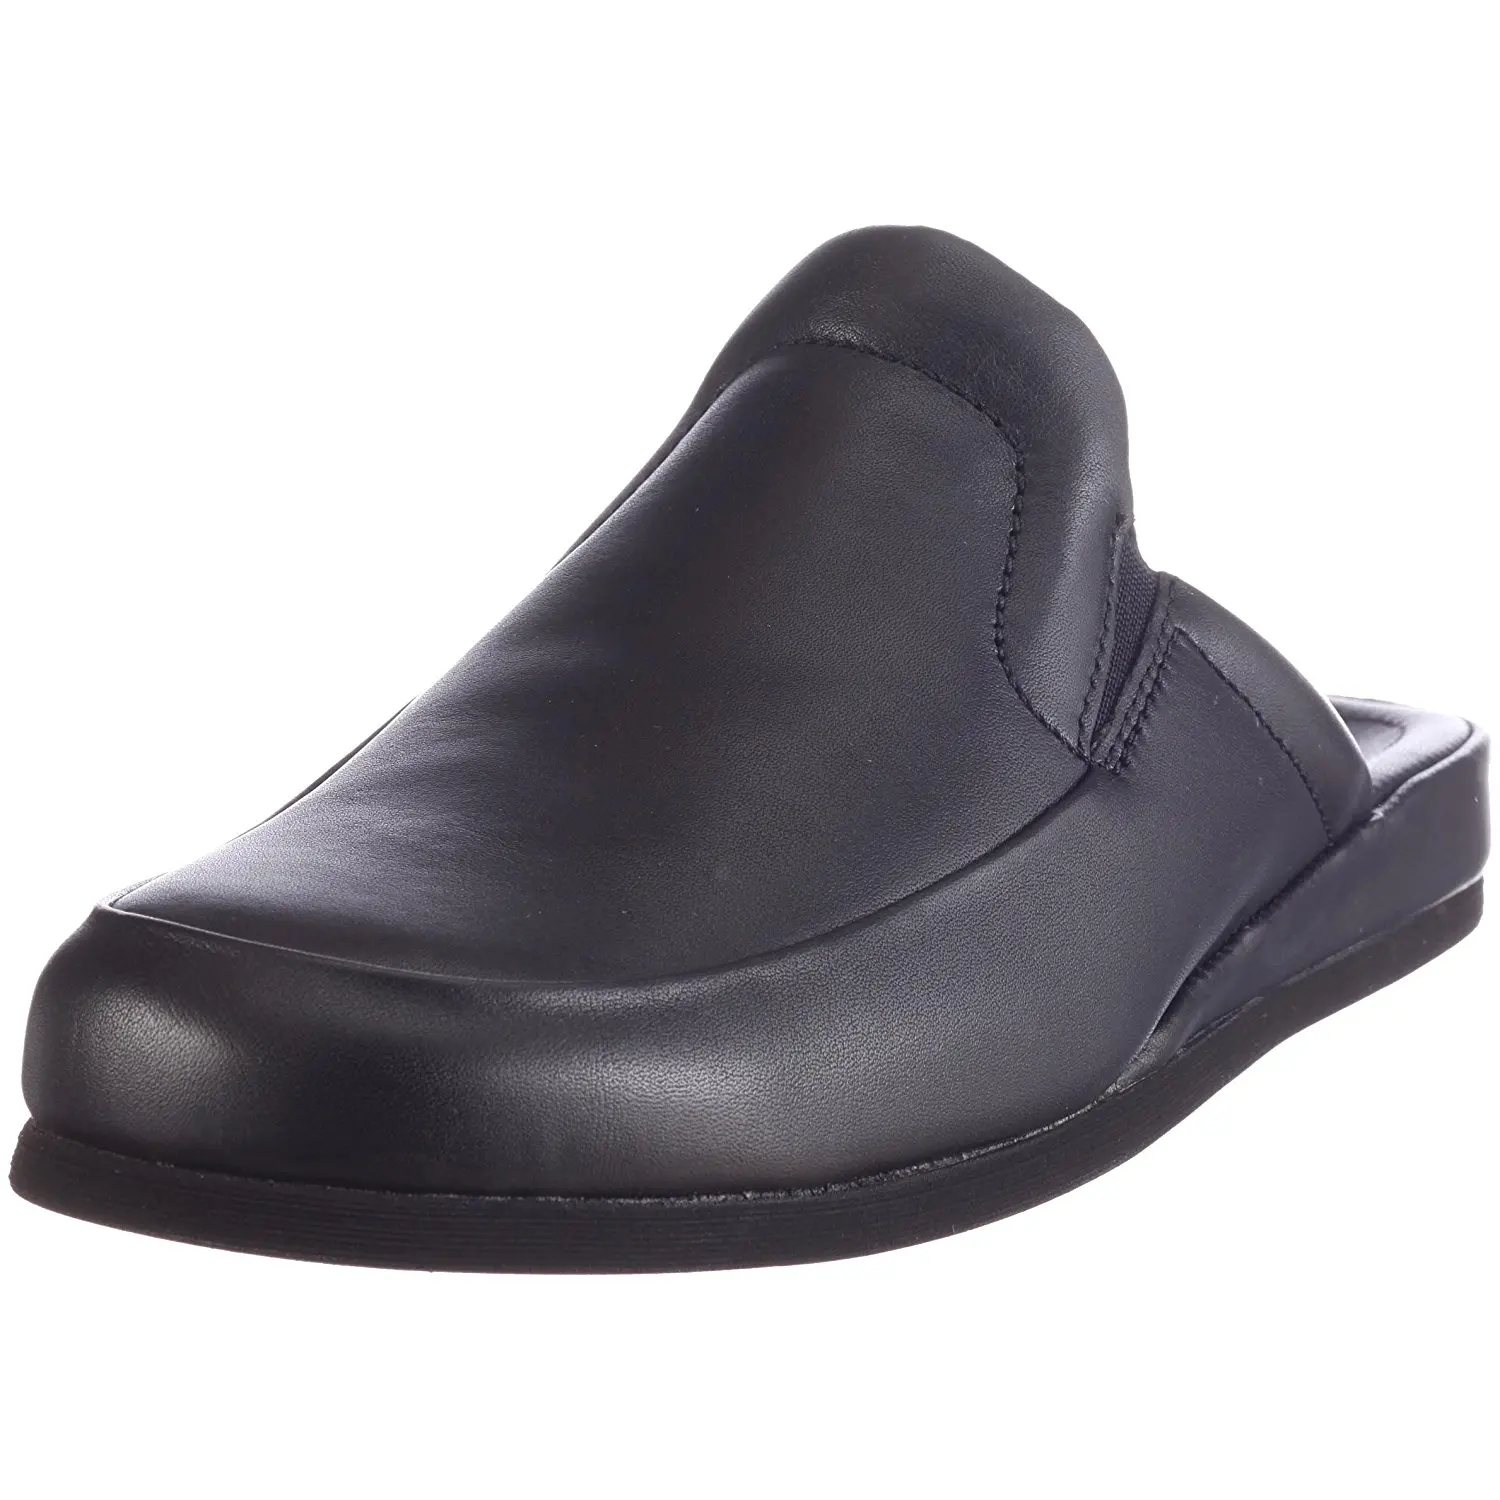 Cheap Rohde Shoes Stockists, find Rohde 